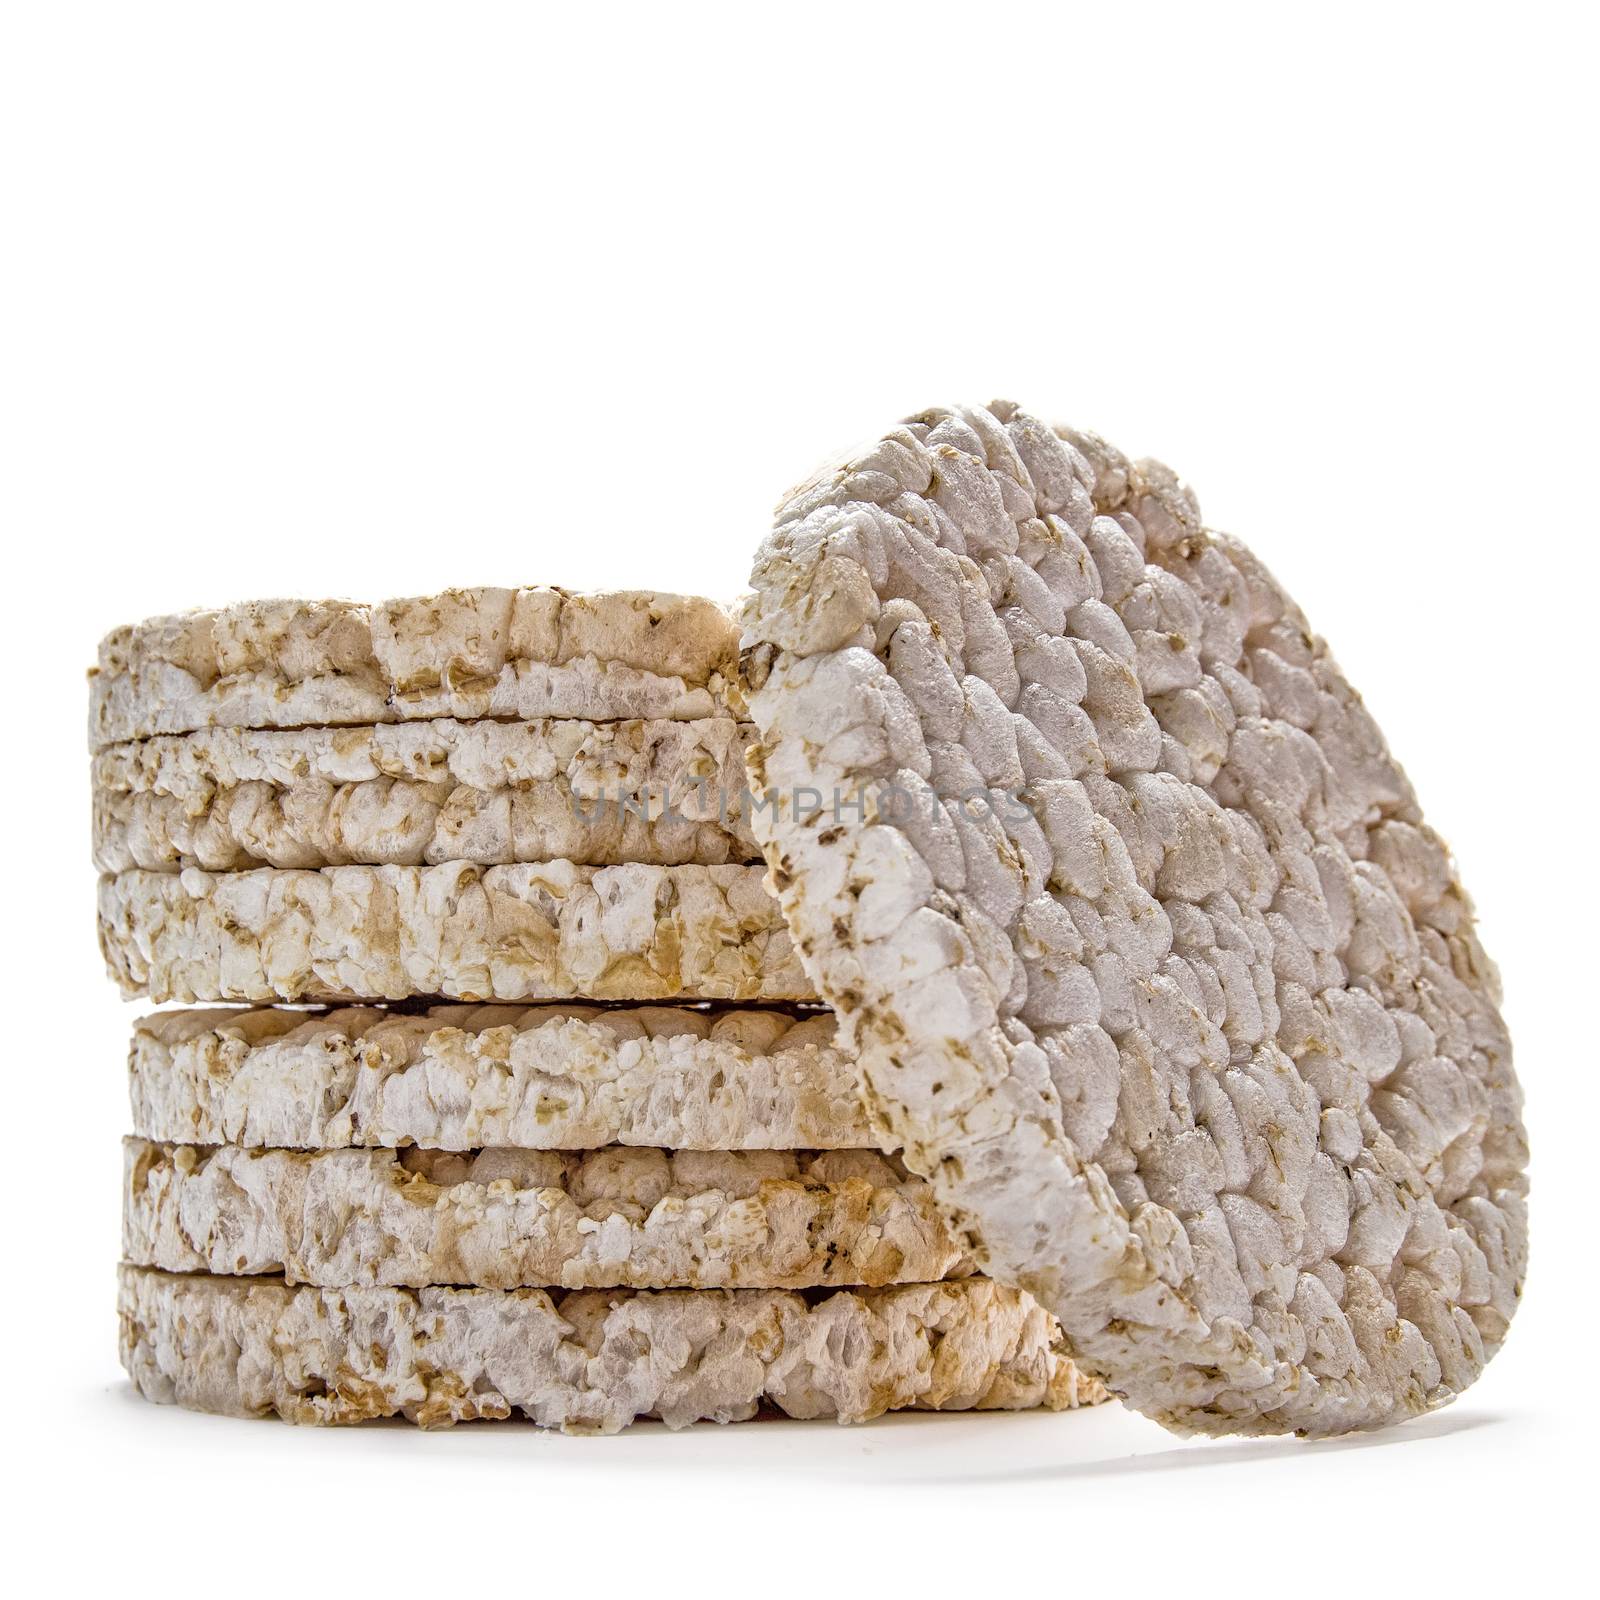 Pile of rice crackers on wite background